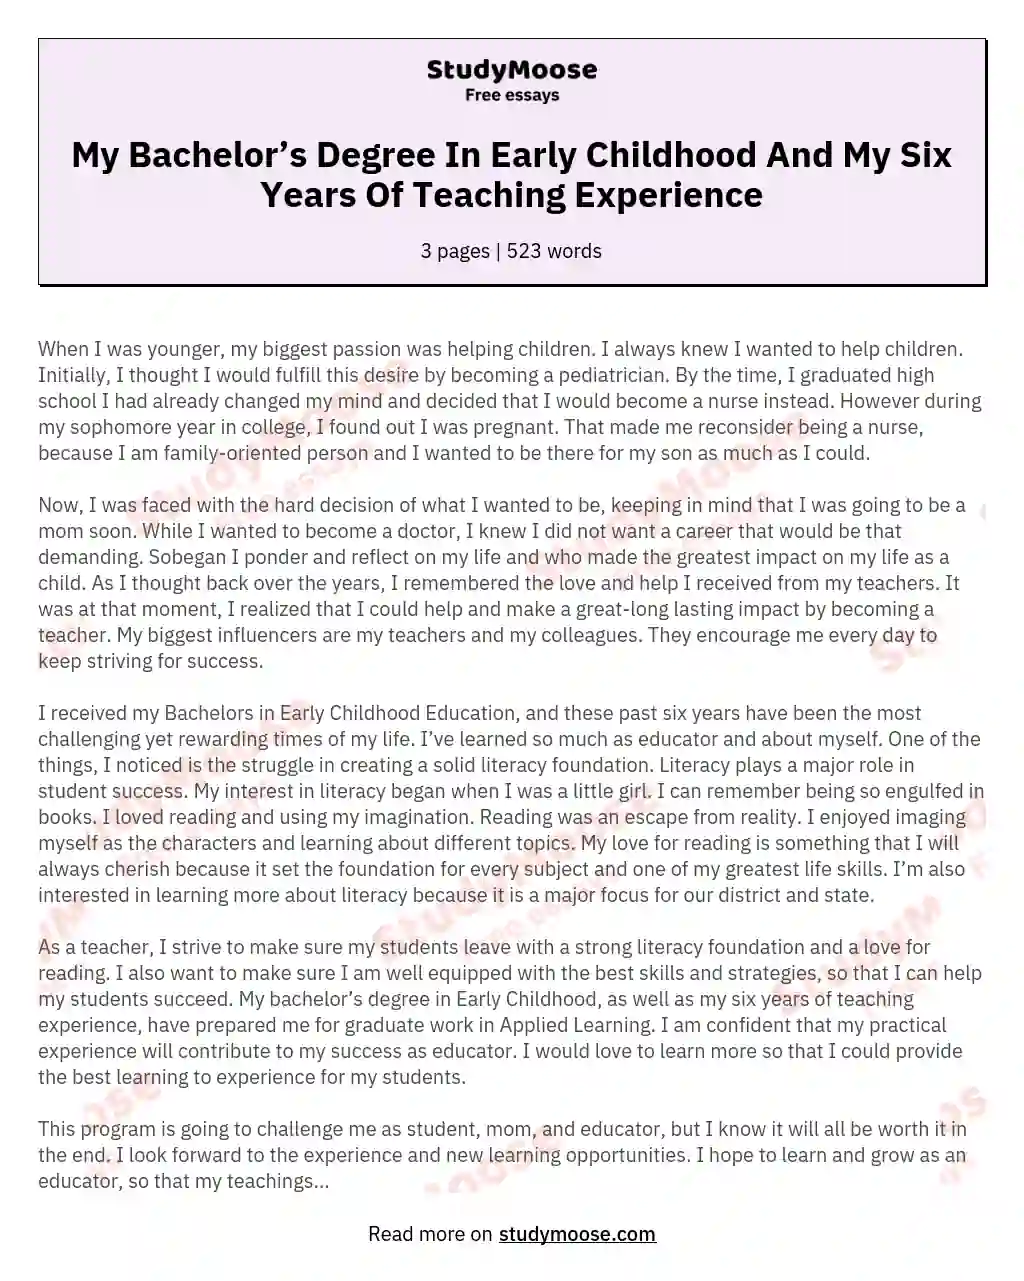 My Bachelor’s Degree In Early Childhood And My Six Years Of Teaching Experience essay